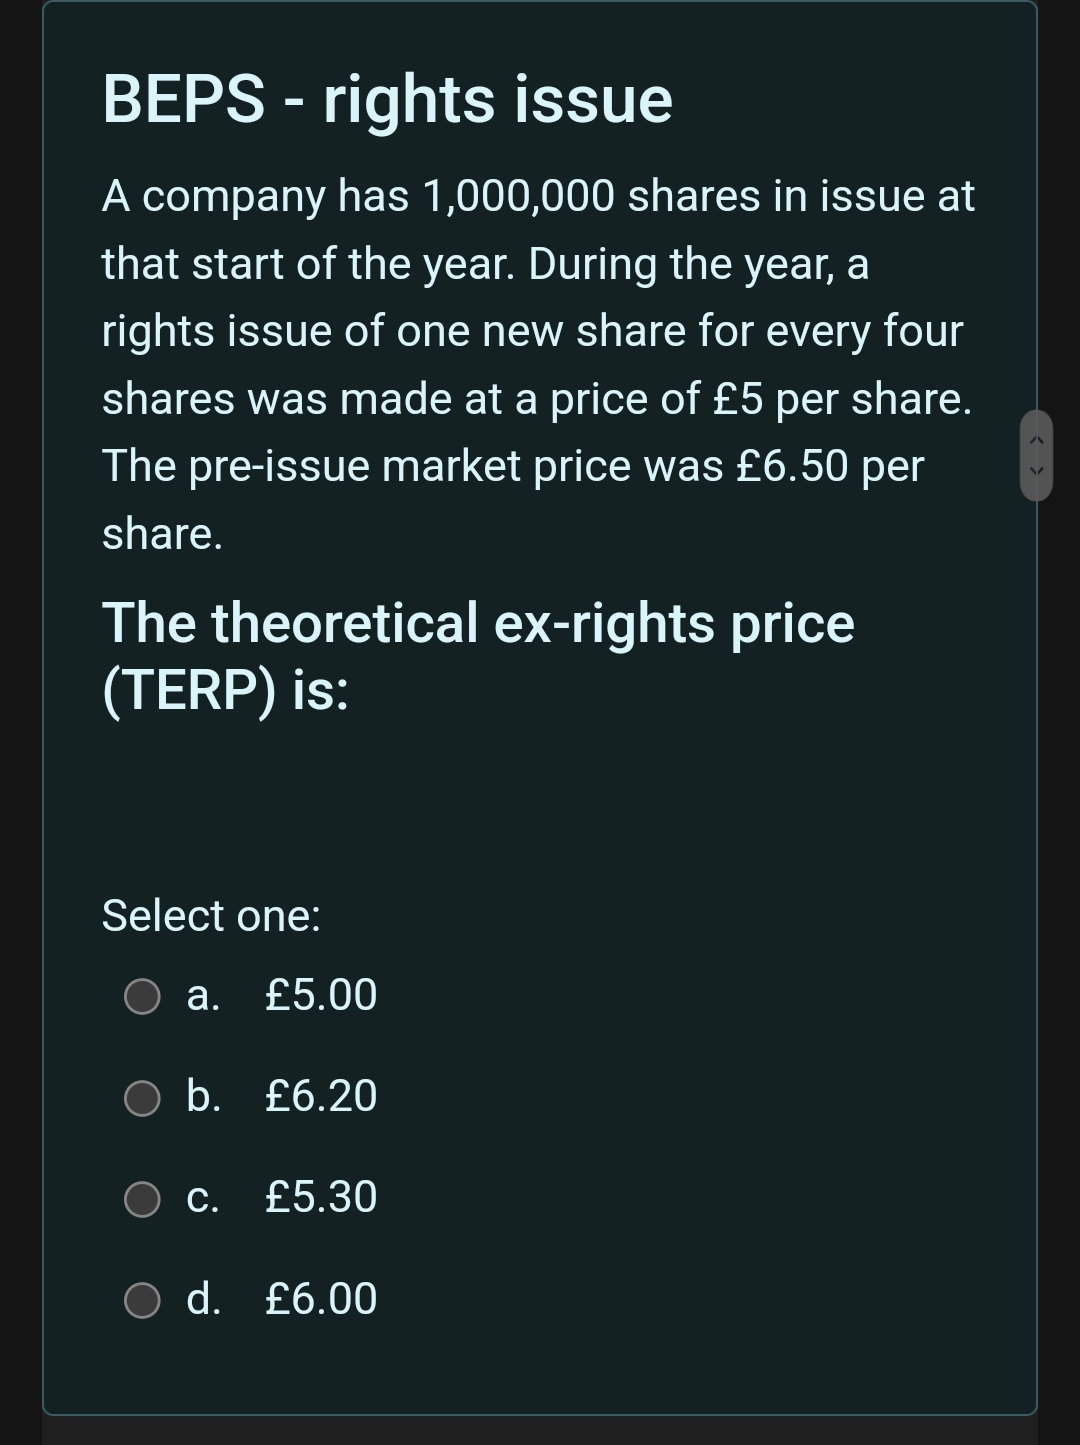 BEPS - rights issue
A company has 1,000,000 shares in issue at
that start of the year. During the year, a
rights issue of one new share for every four
shares was made at a price of £5 per share.
The pre-issue market price was £6.50 per
share.
The theoretical ex-rights price
(TERP) is:
Select one:
O a. £5.00
b. £6.20
C.
£5.30
O d. £6.00